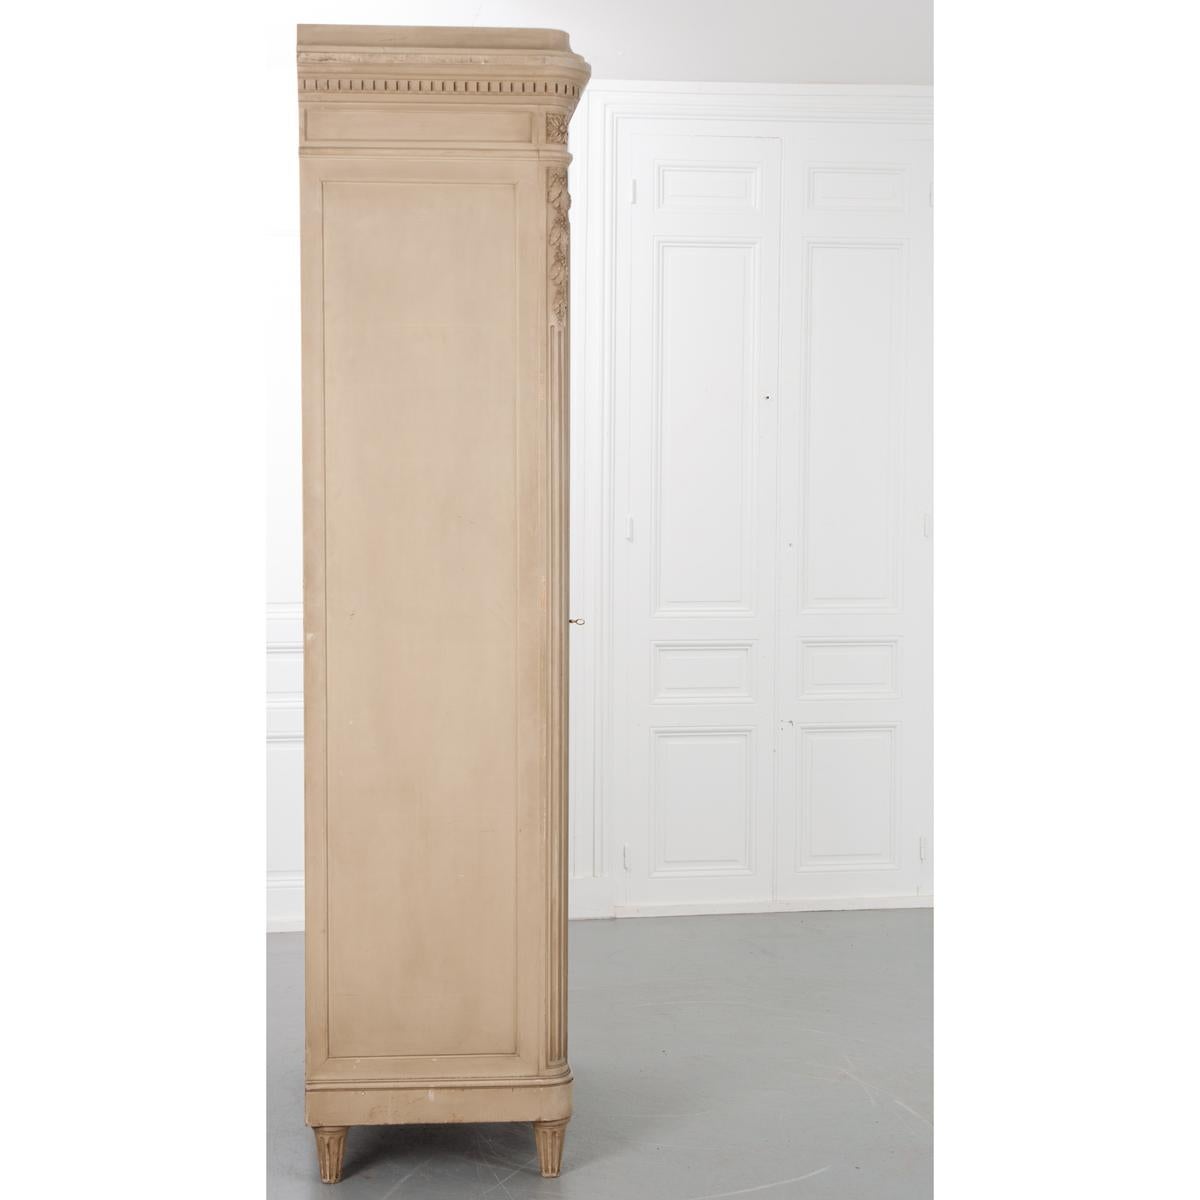 French painted armoire with a single mirrored door. Exquisite details grace this piece, top to bottom. Impressive dentil crown moulding sits atop a recessed panel, framed frieze with florets set into the rounded corners. The large mirrored door has